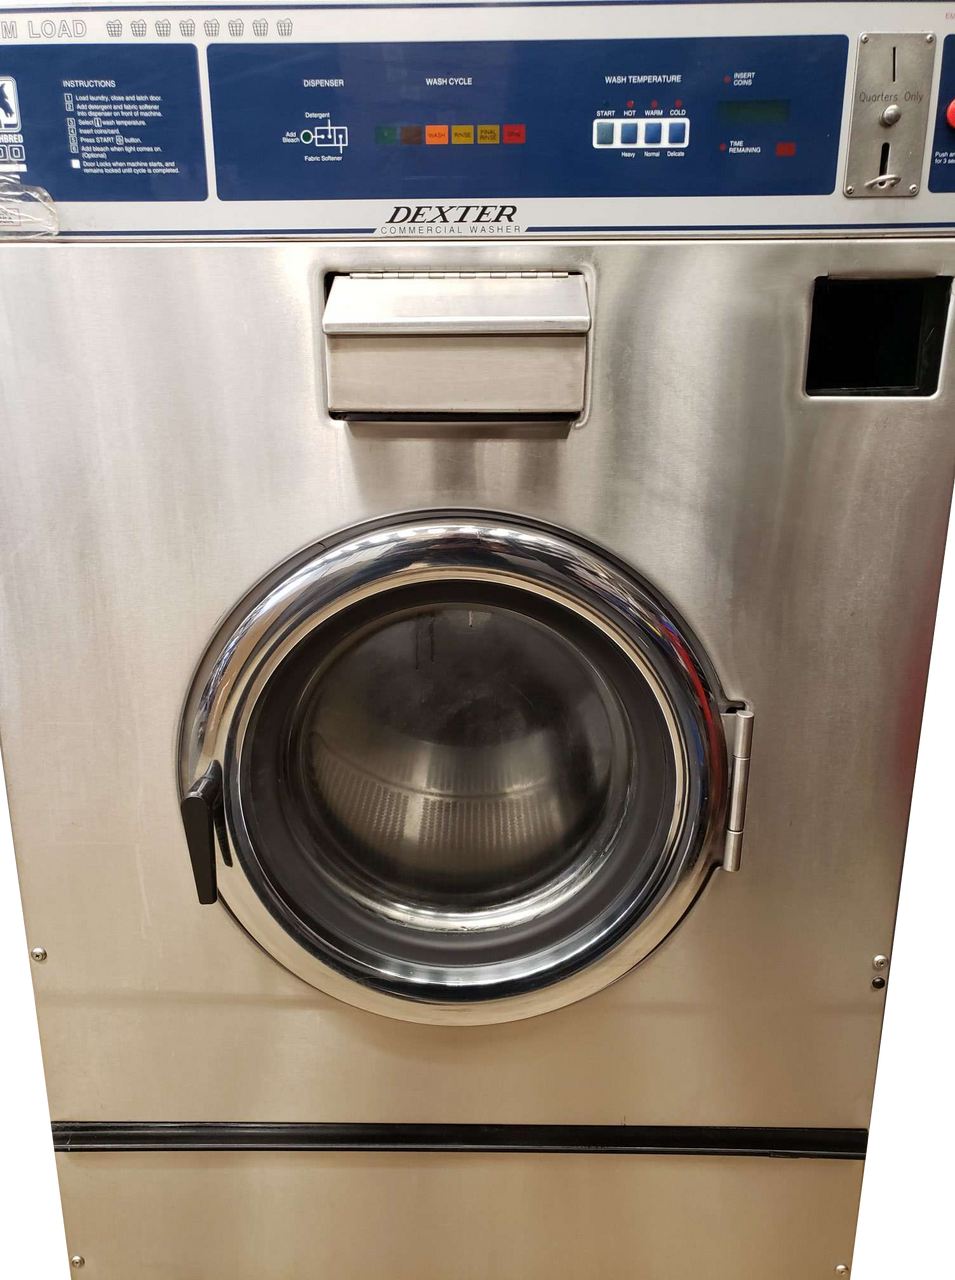 DEXTER T-1200 Commercial Front Load Washer MODEL: WCAD75KCS Serial No:  20512000486650 - 123 Laundry Solutions